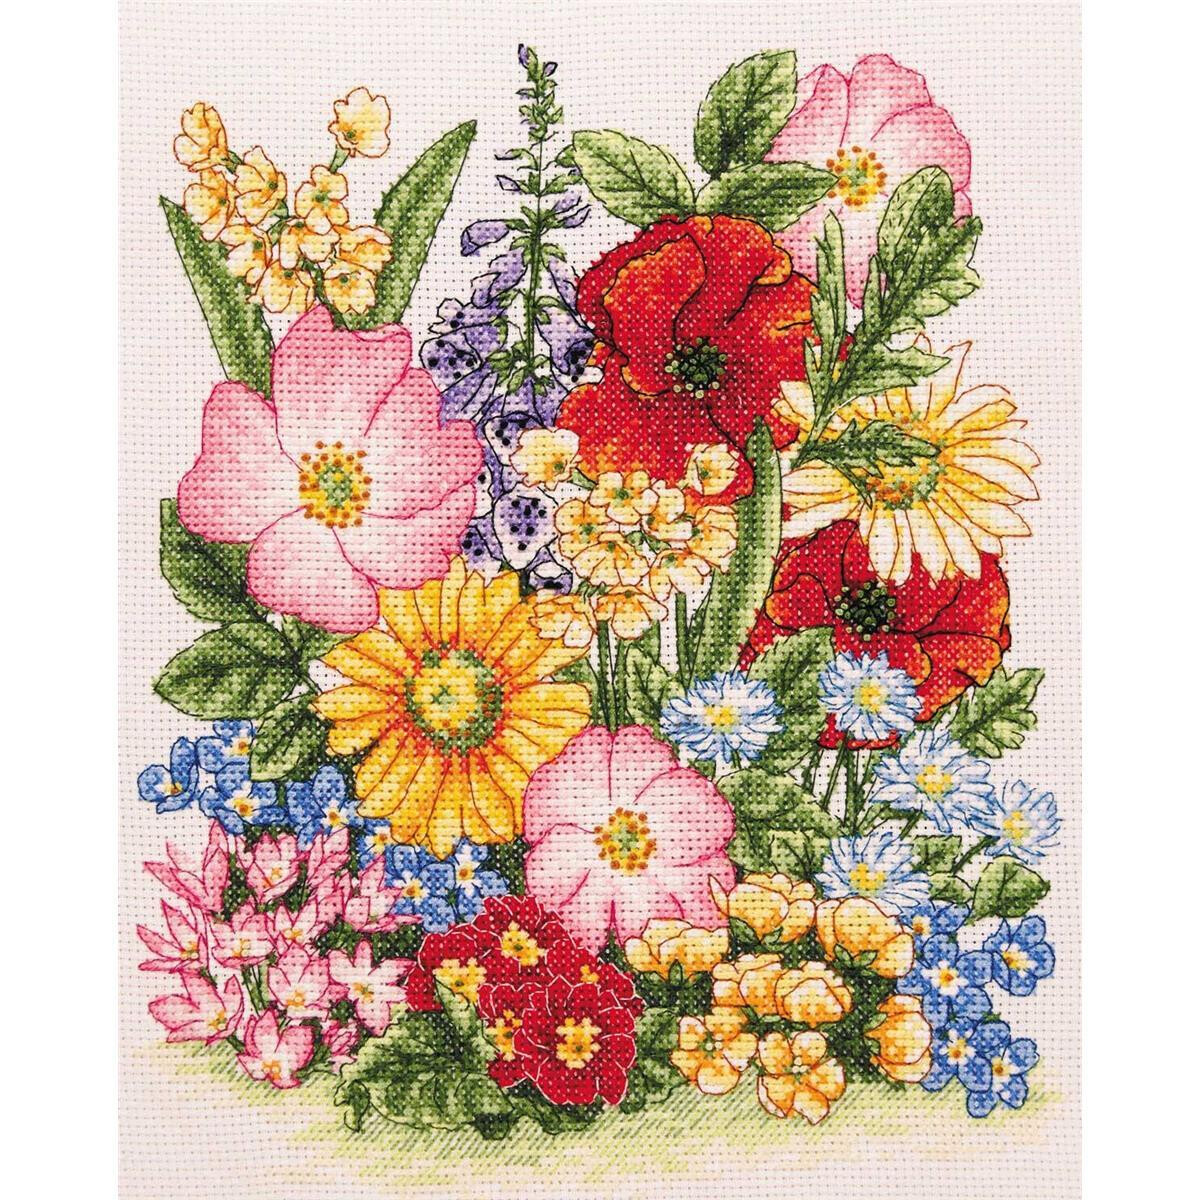 Anchor counted Cross Stitch kit "Meadow...